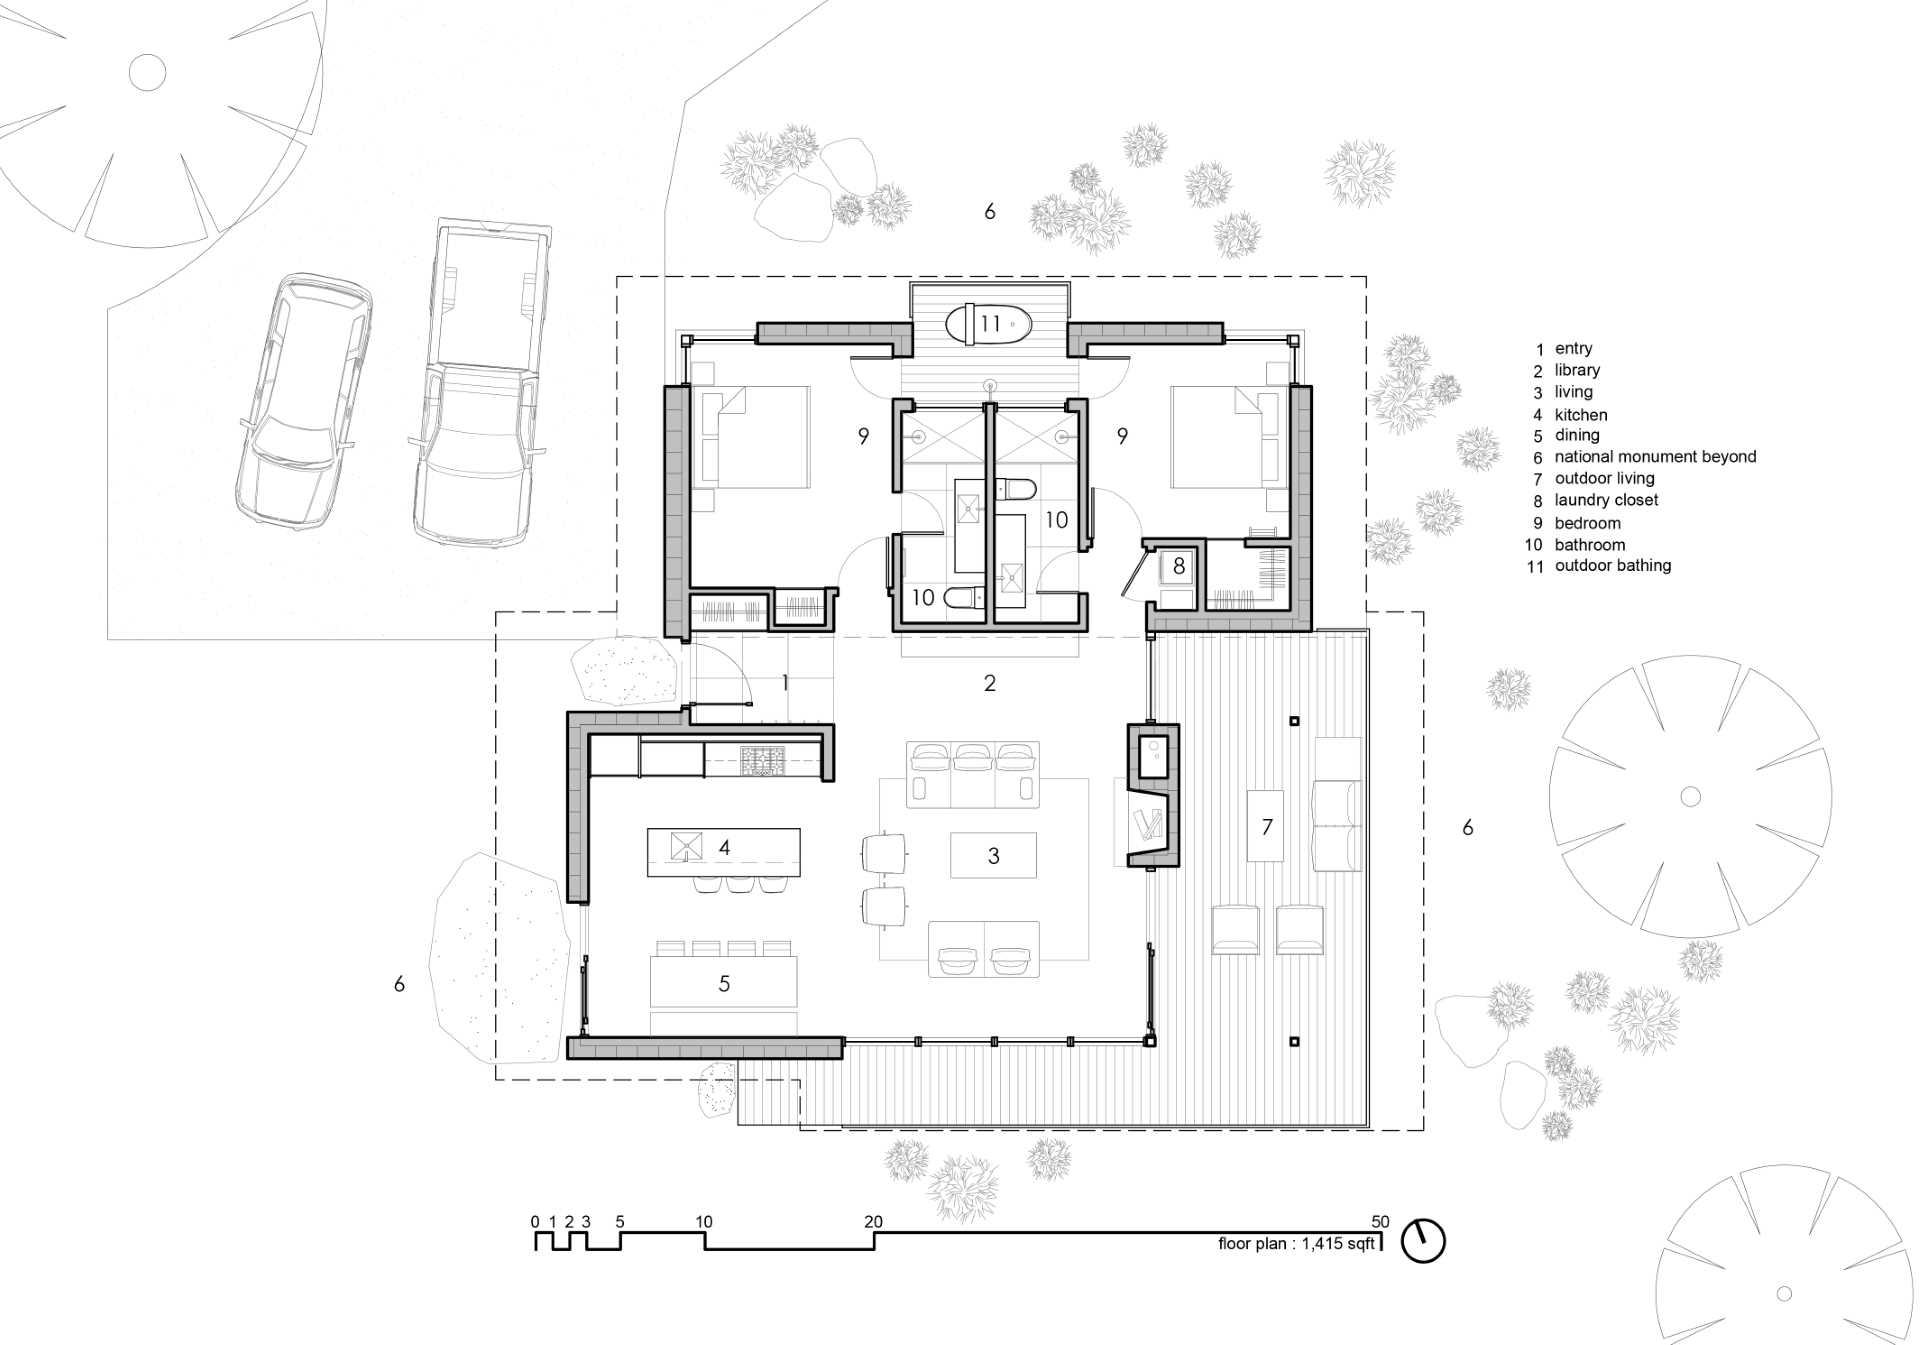 The floor plan of a modern desert home that features weathering steel, split-face concrete block, and cedar.